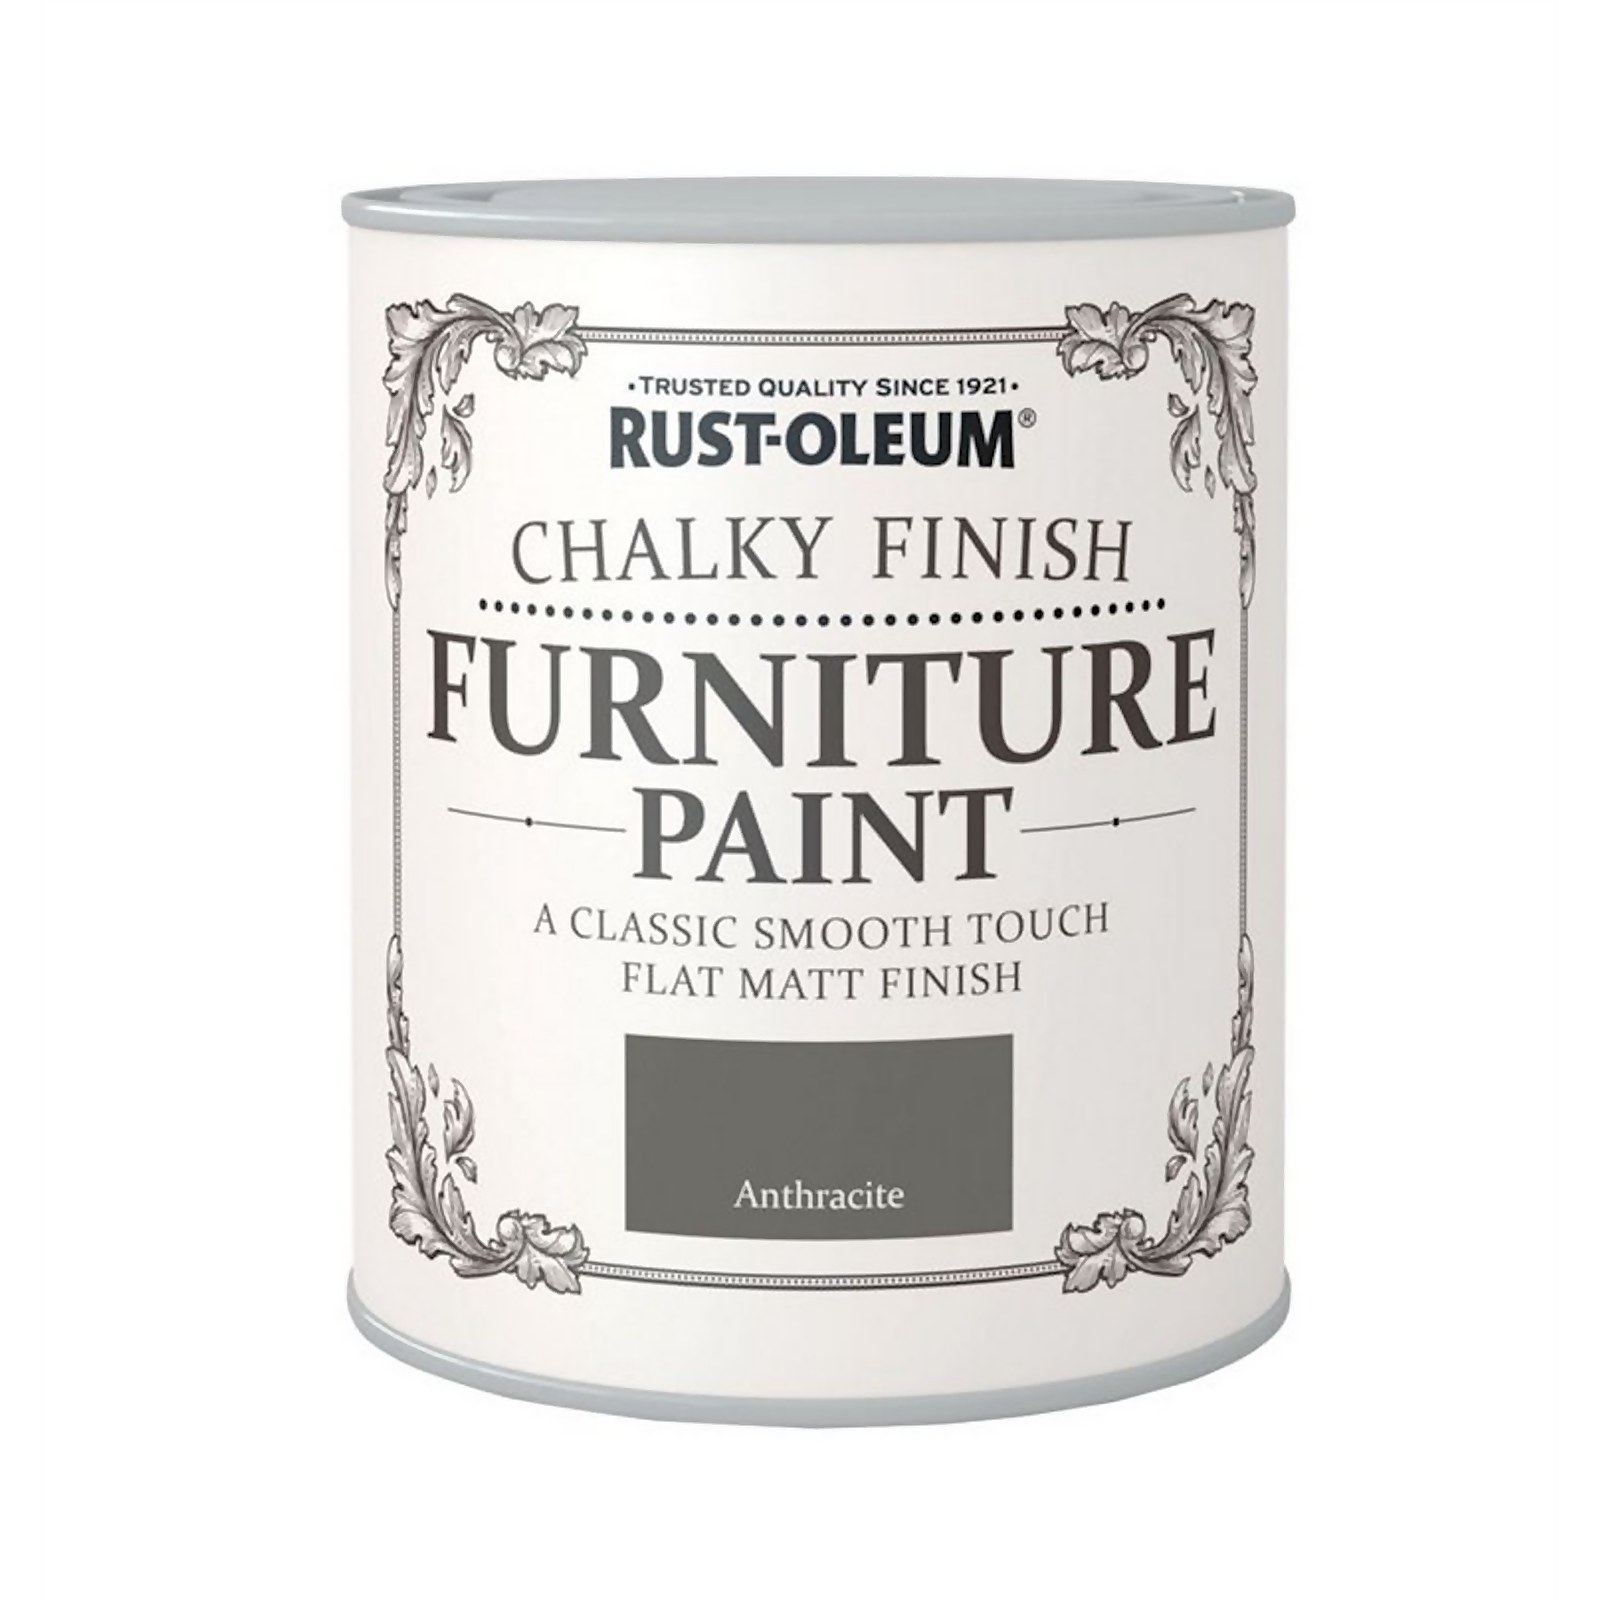 Rust-Oleum Chalky Finish Furniture Paint Anthracite - 125ml